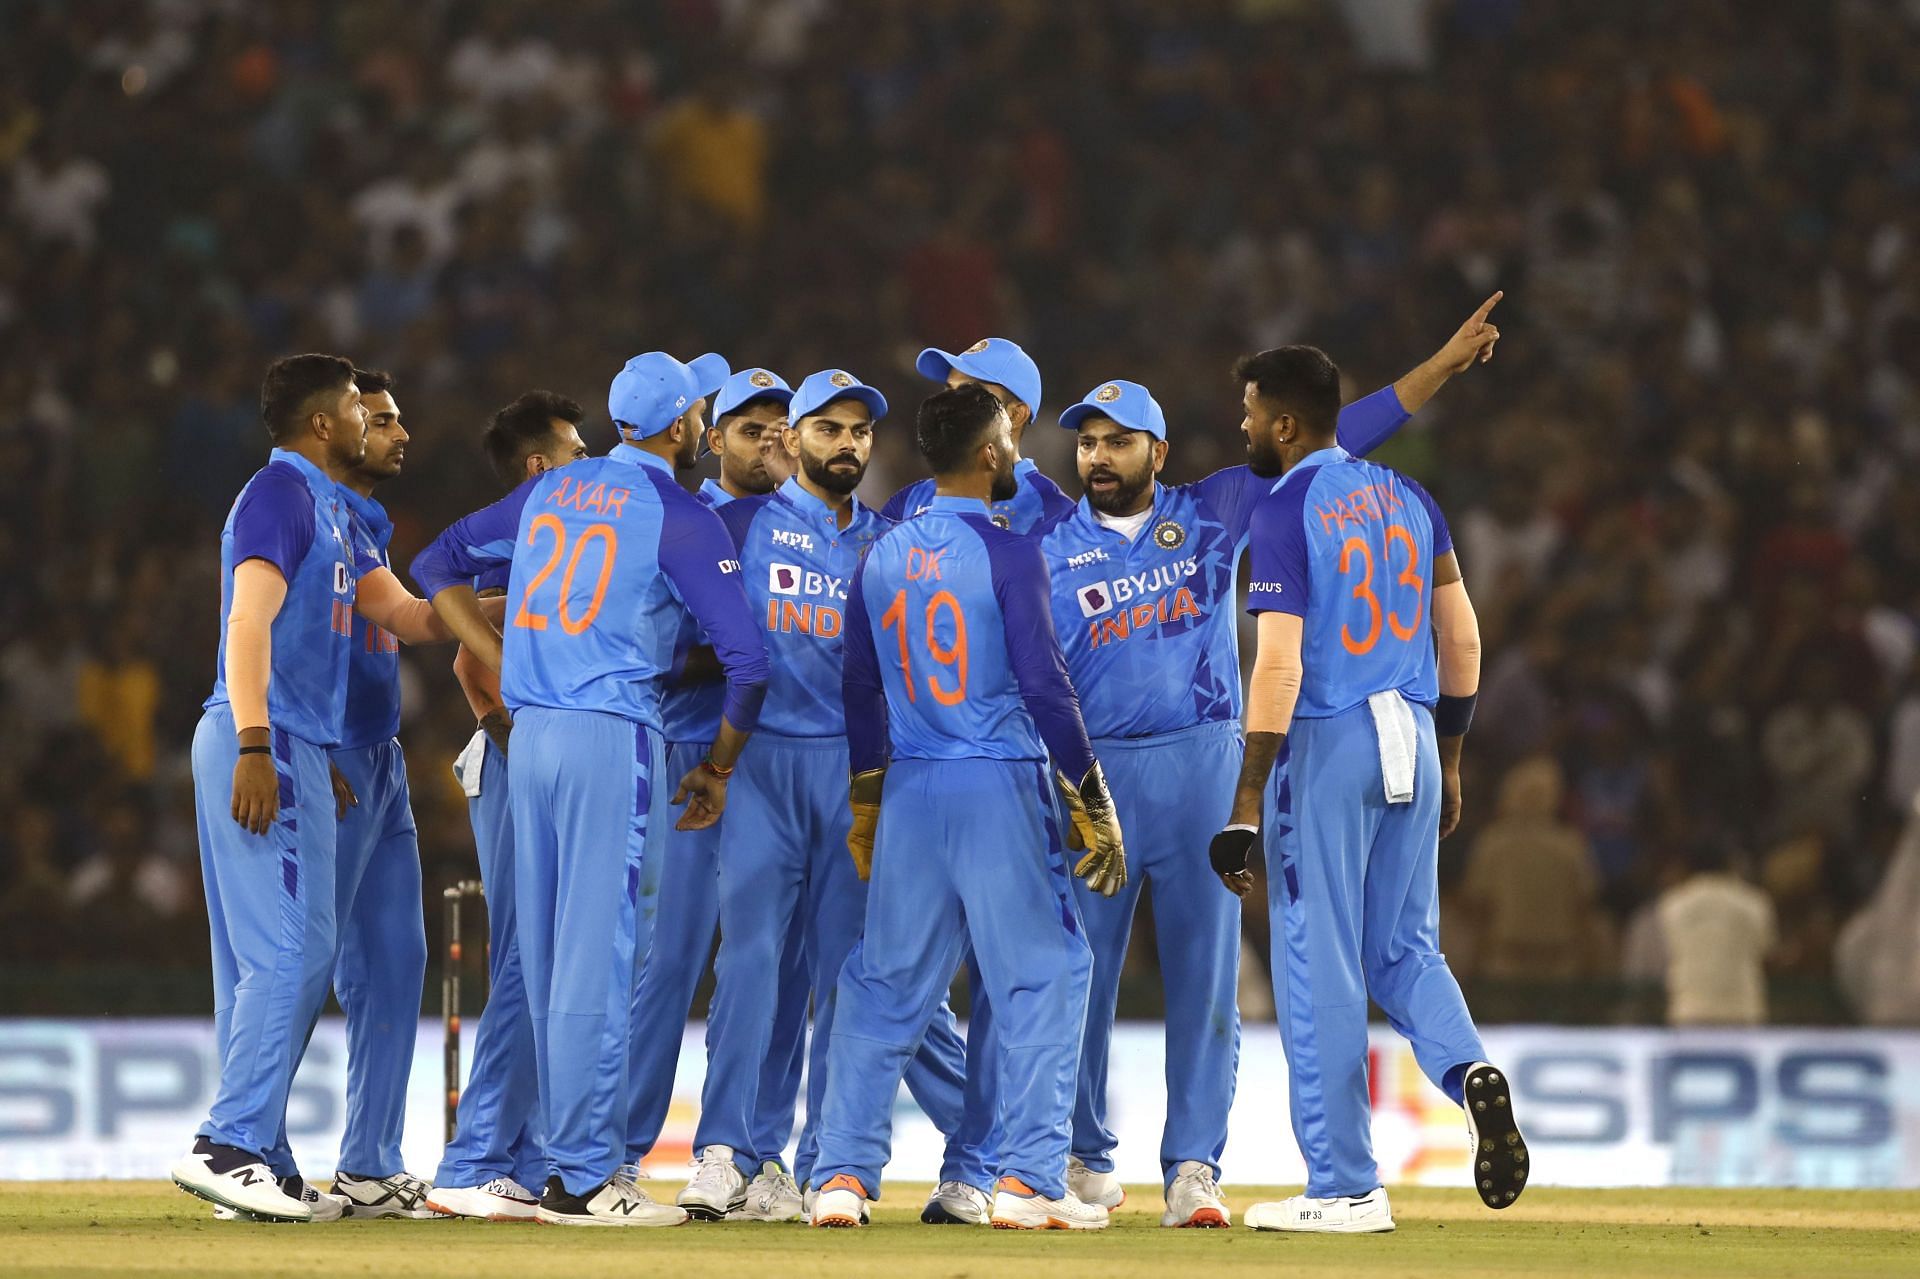 India vs Western Australia XI, Warm-up Match 1 Probable XIs, pitch report, weather forecast, match prediction and live streaming details